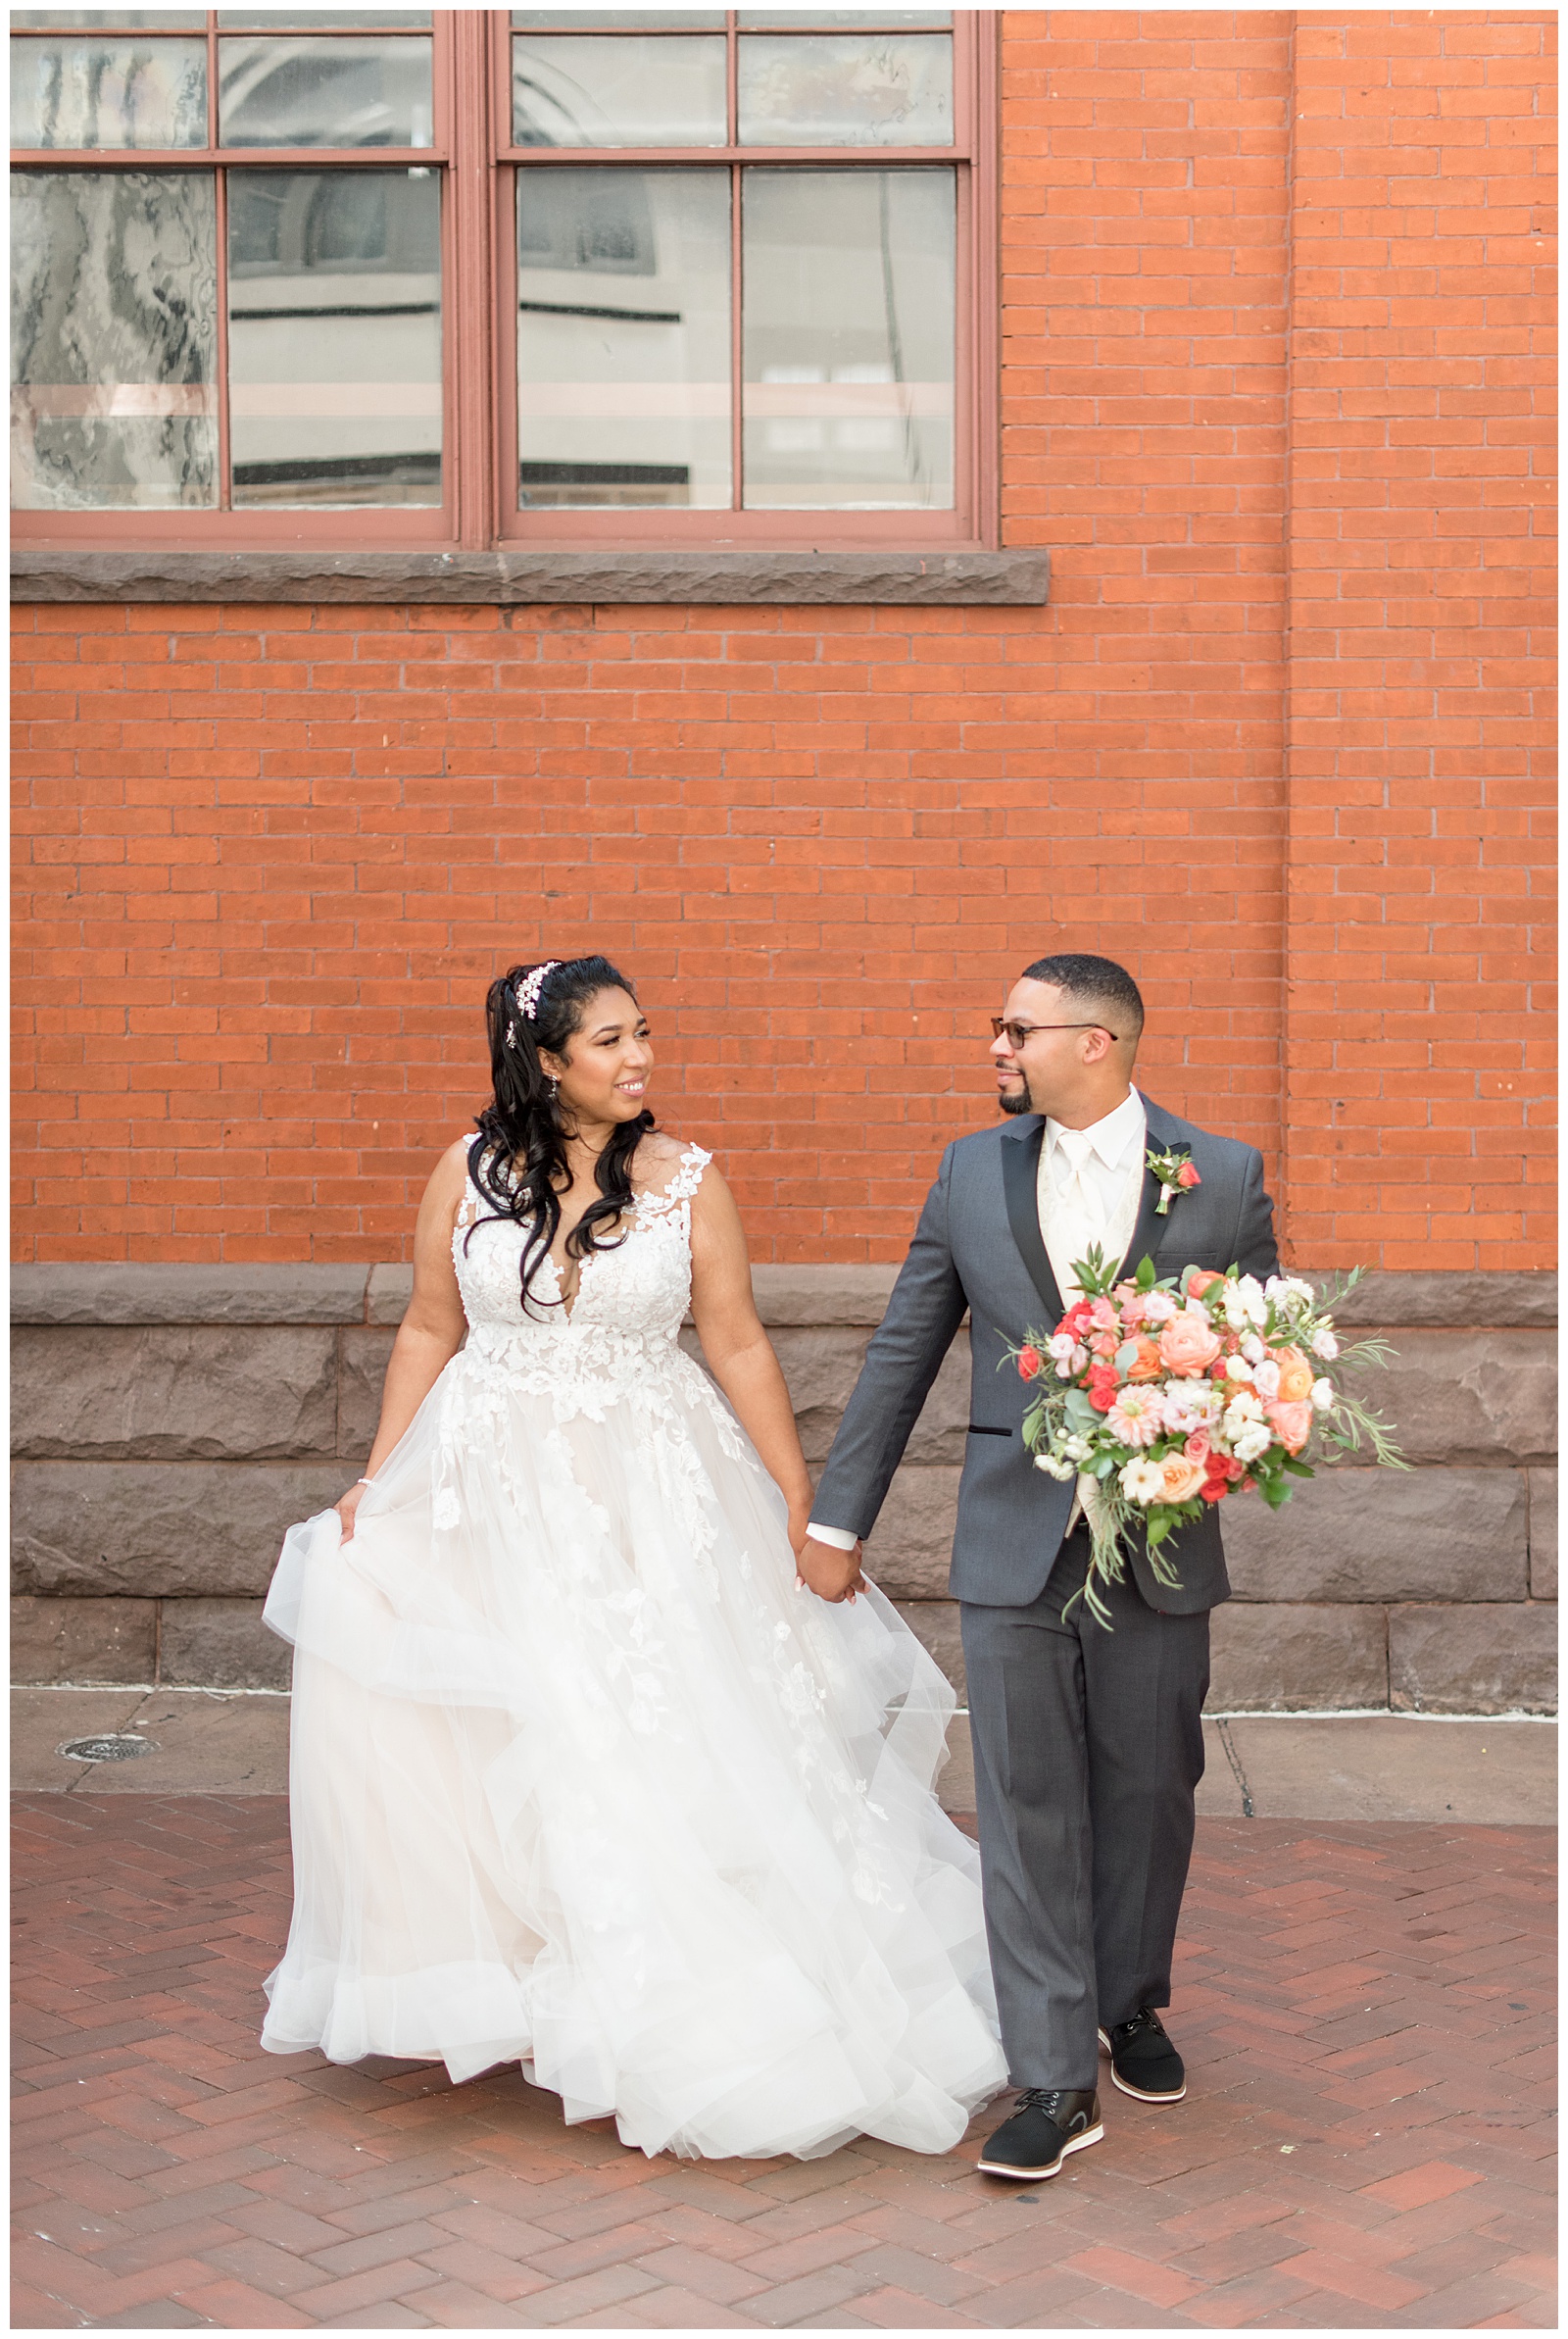 bride and groom holding hands and looking at each other as groom holds colorful bouquet by central market's brick building